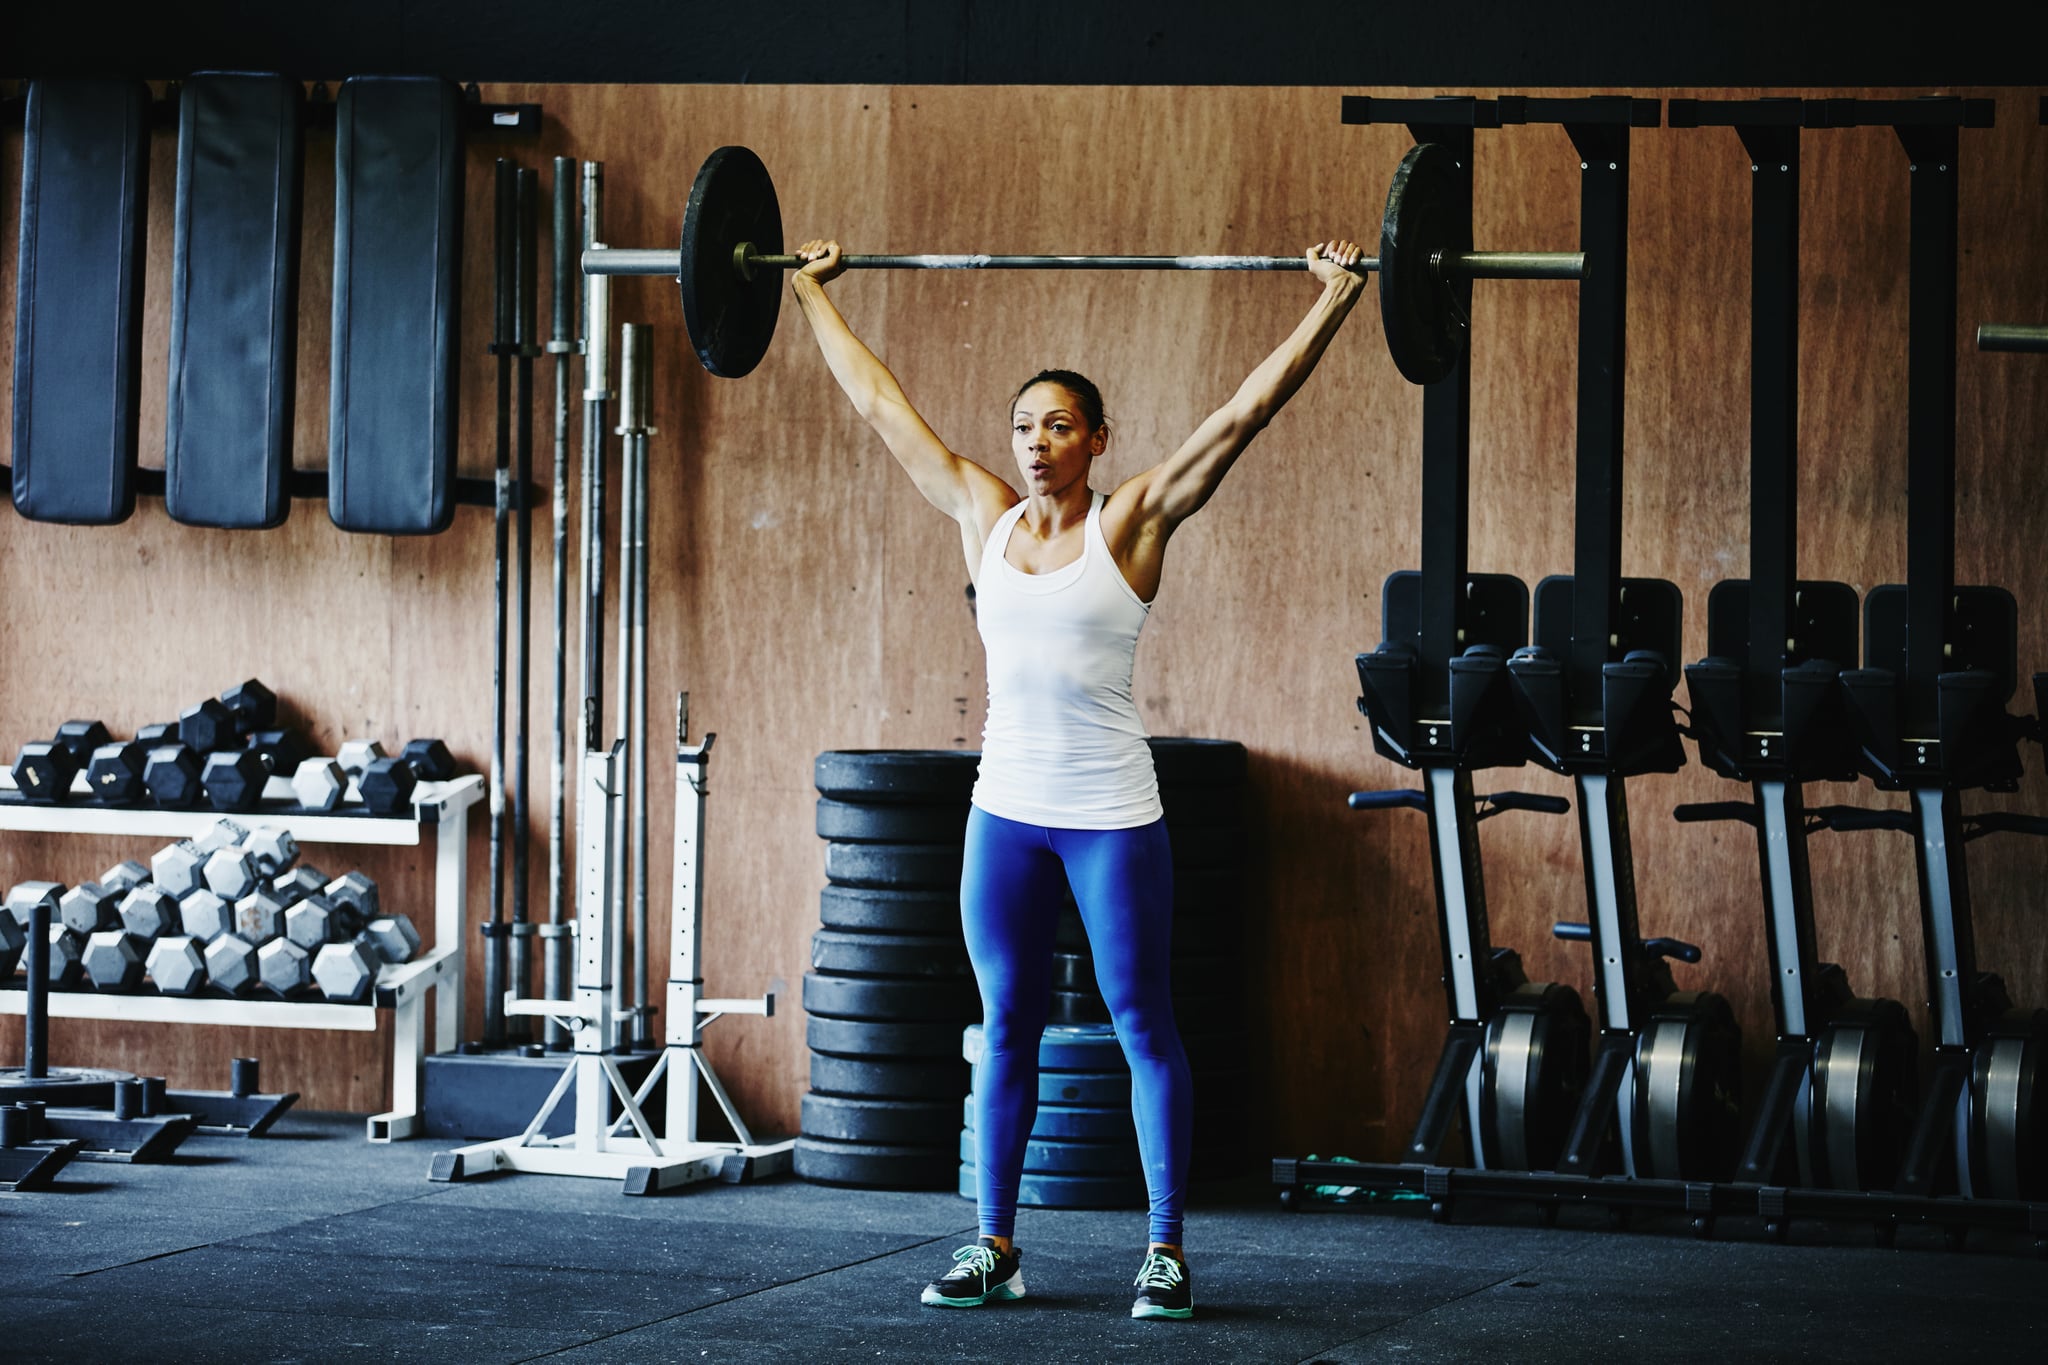 Woman pressing barbell overhead during crossfit training workout in gym